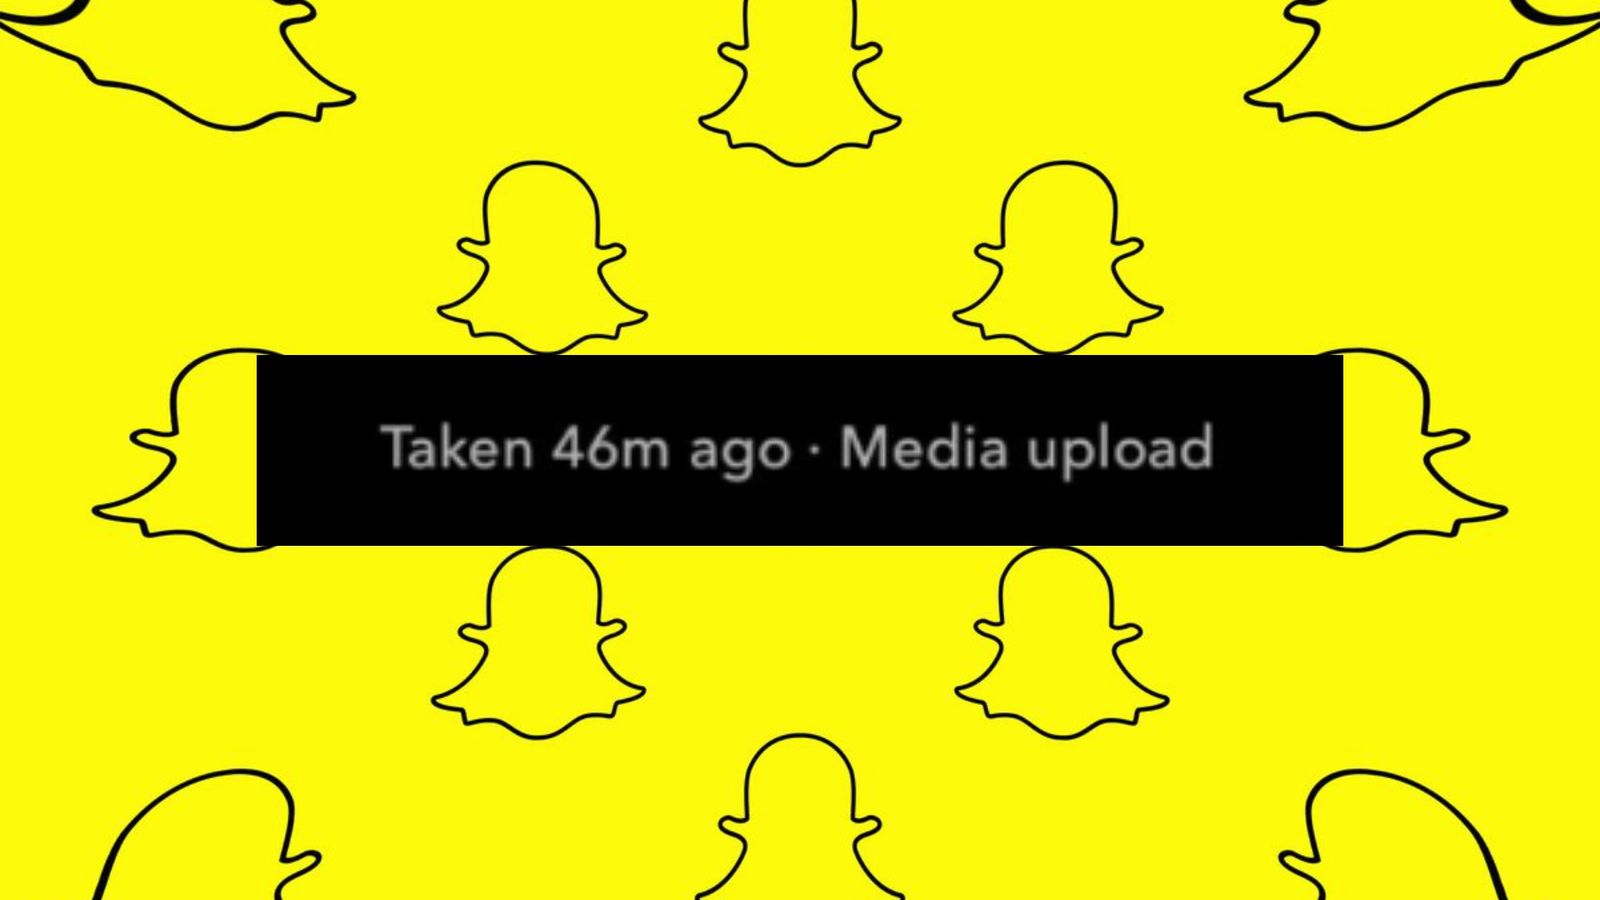 Snapchat’s new ‘Media upload’ label with the timestamp ‘Taken 46m ago’ on a yellow background with Snapchat logo outlines.